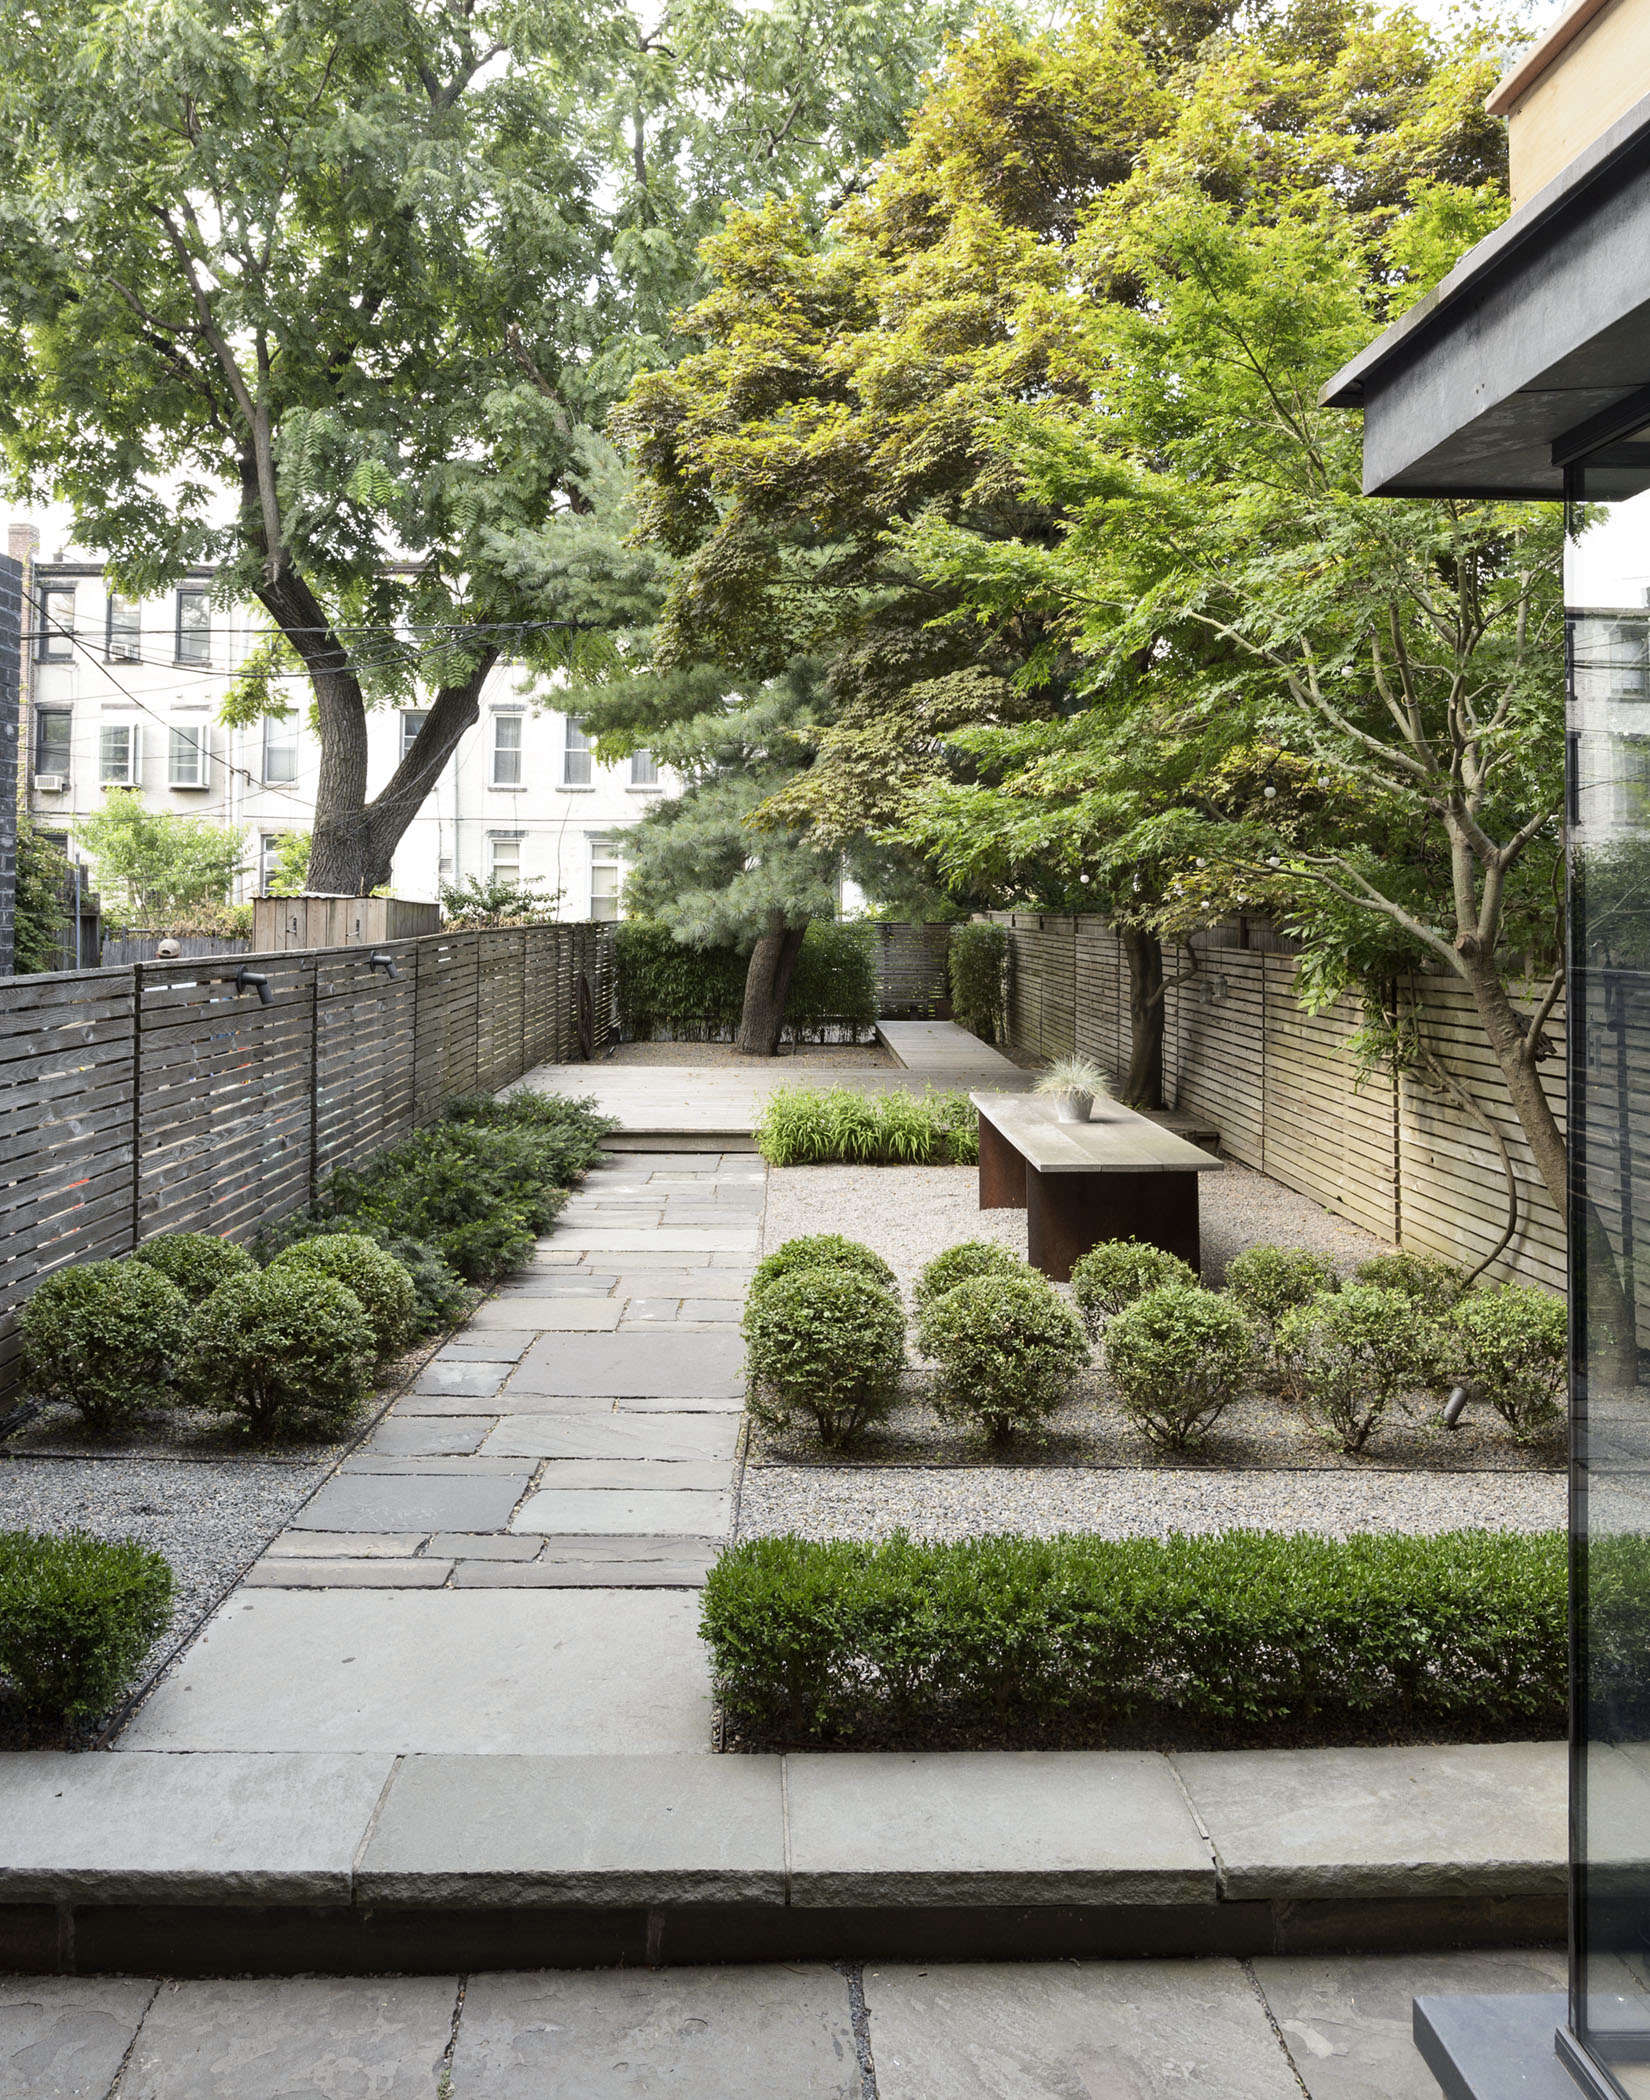 Use Plants In A City Garden, Landscaping To Hide Fence